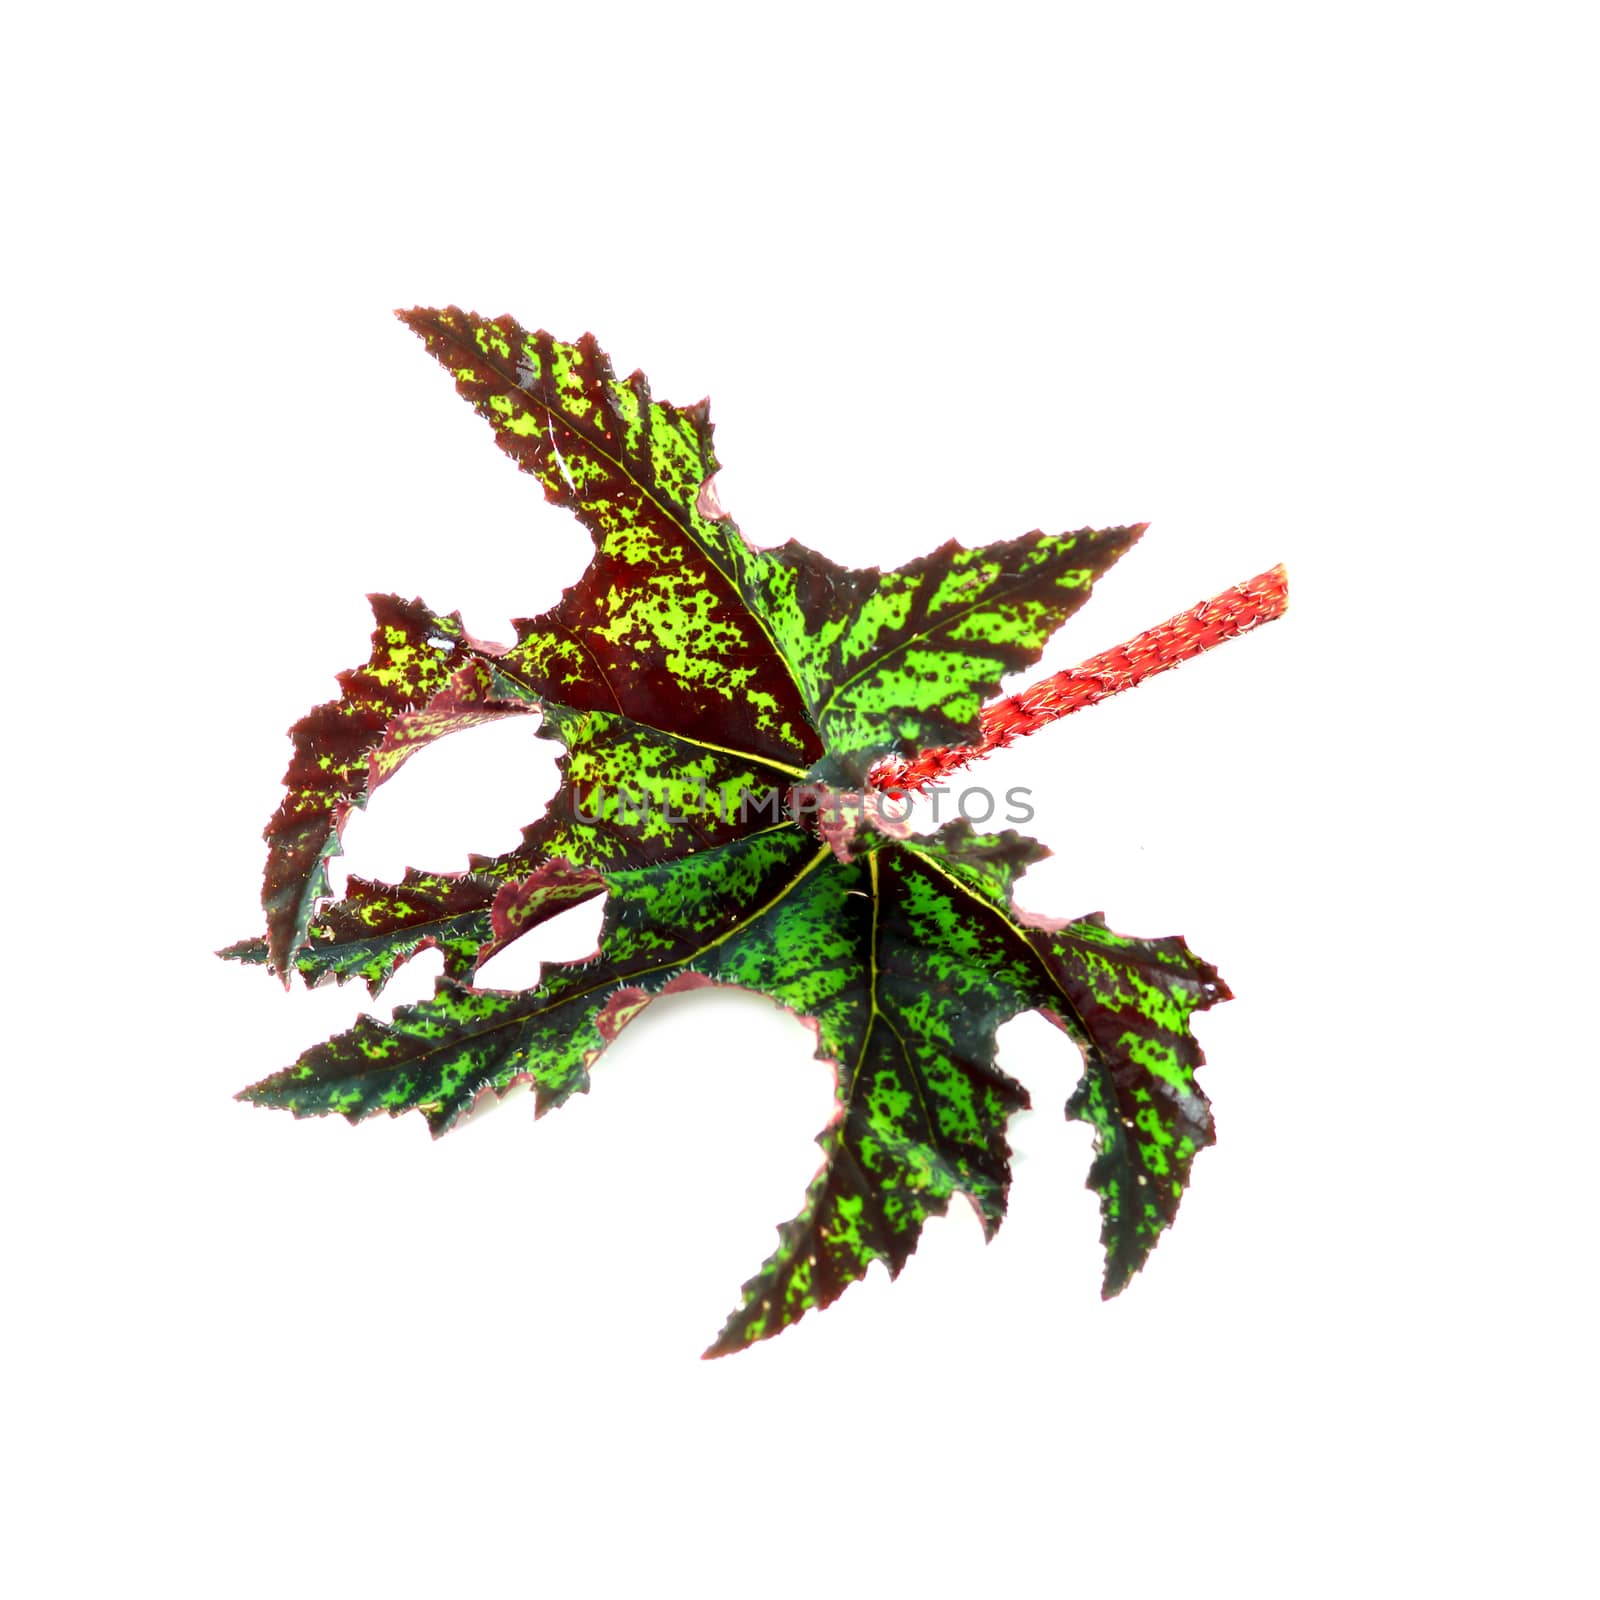 The leaves of the plant, Begonia by Noppharat_th